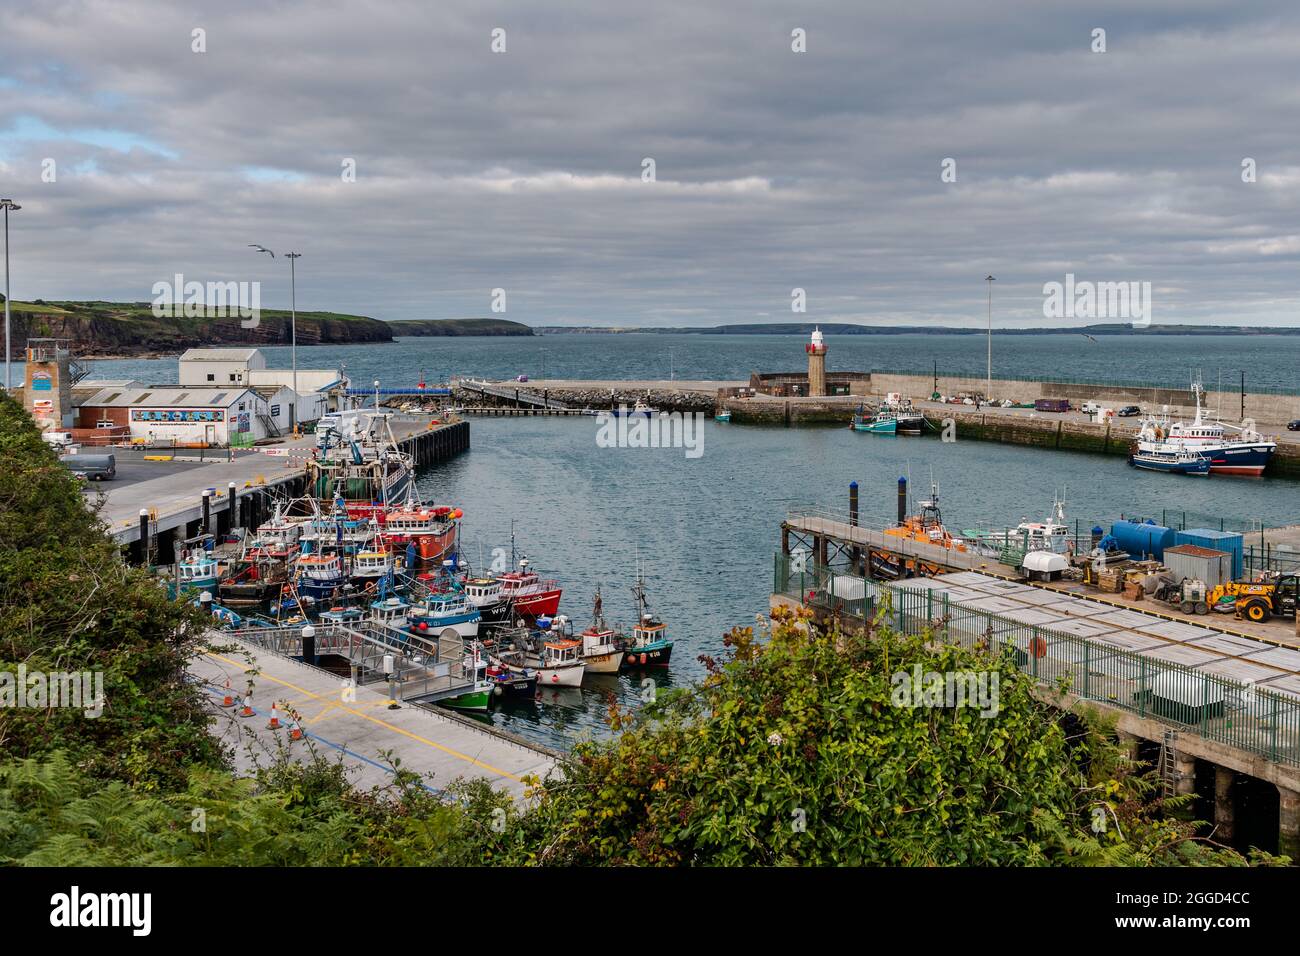 Fishing harbour/port in Dunmore East, County Waterford, Ireland. Stock Photo